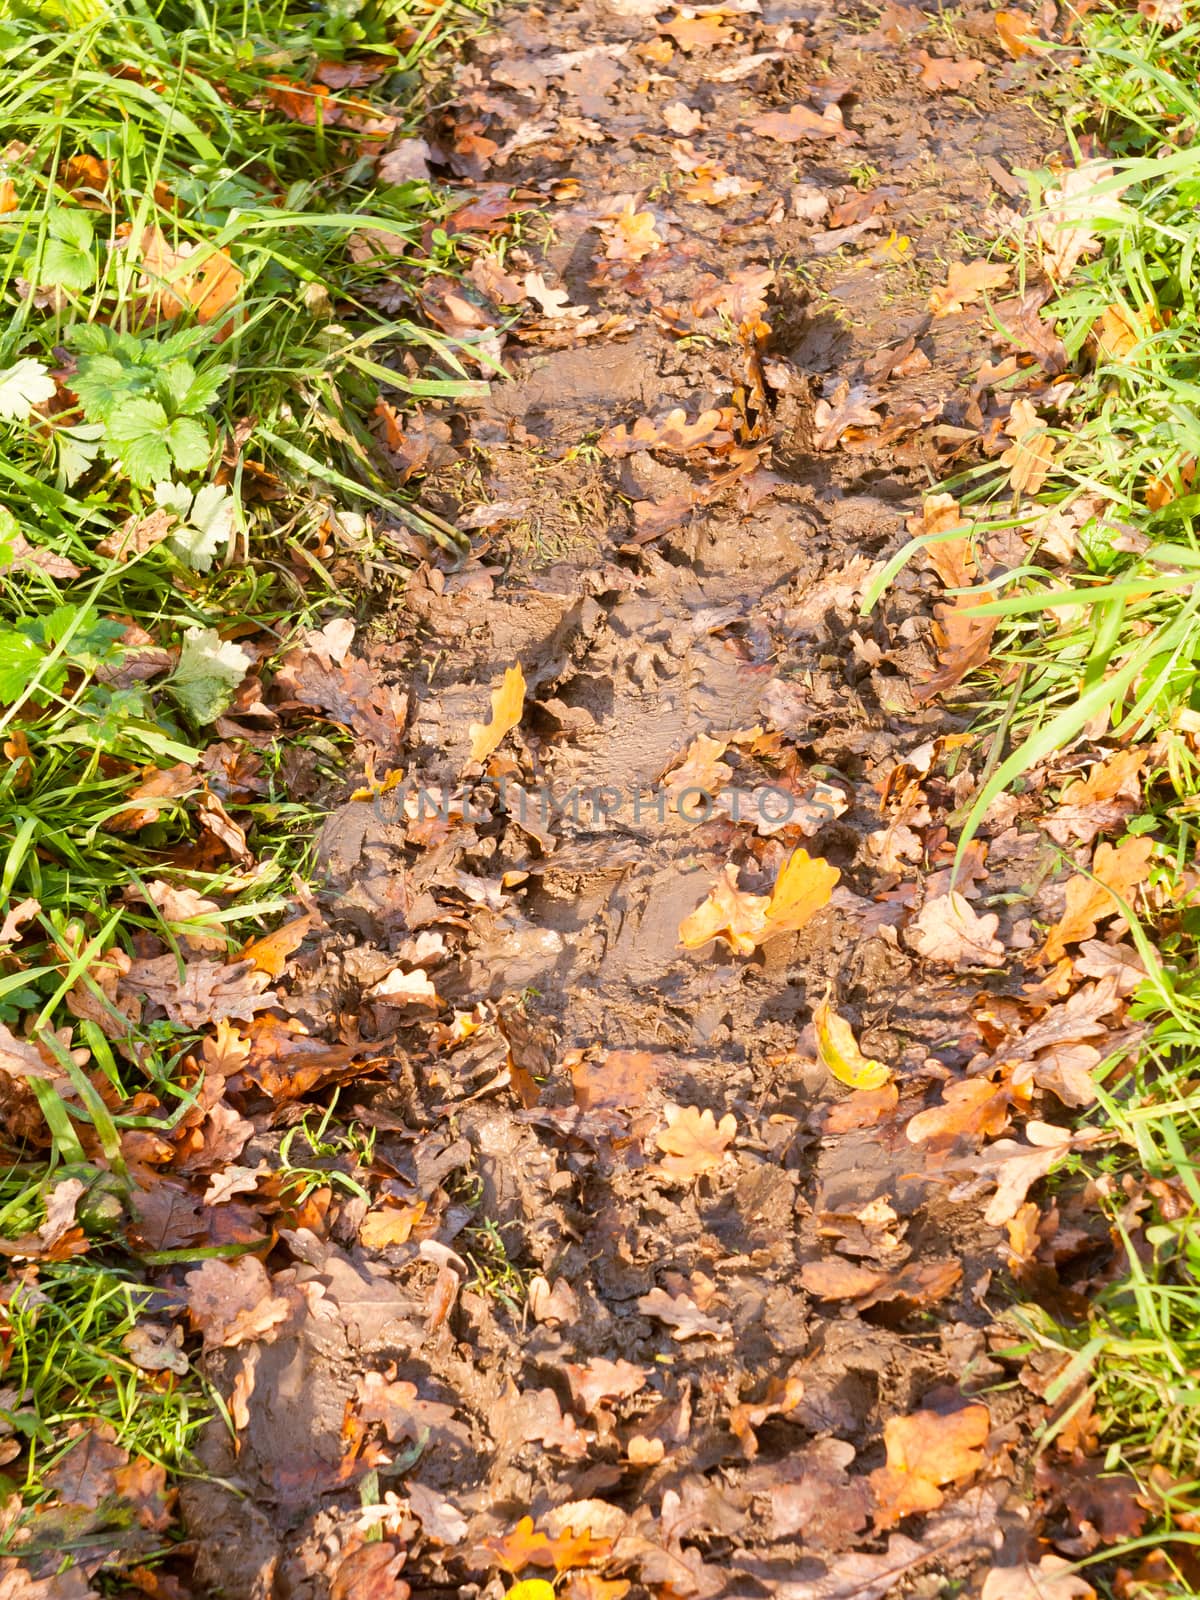 wet and muddy walkway path trek on floor with green grass and fallen autumn leaves; essex; england; uk